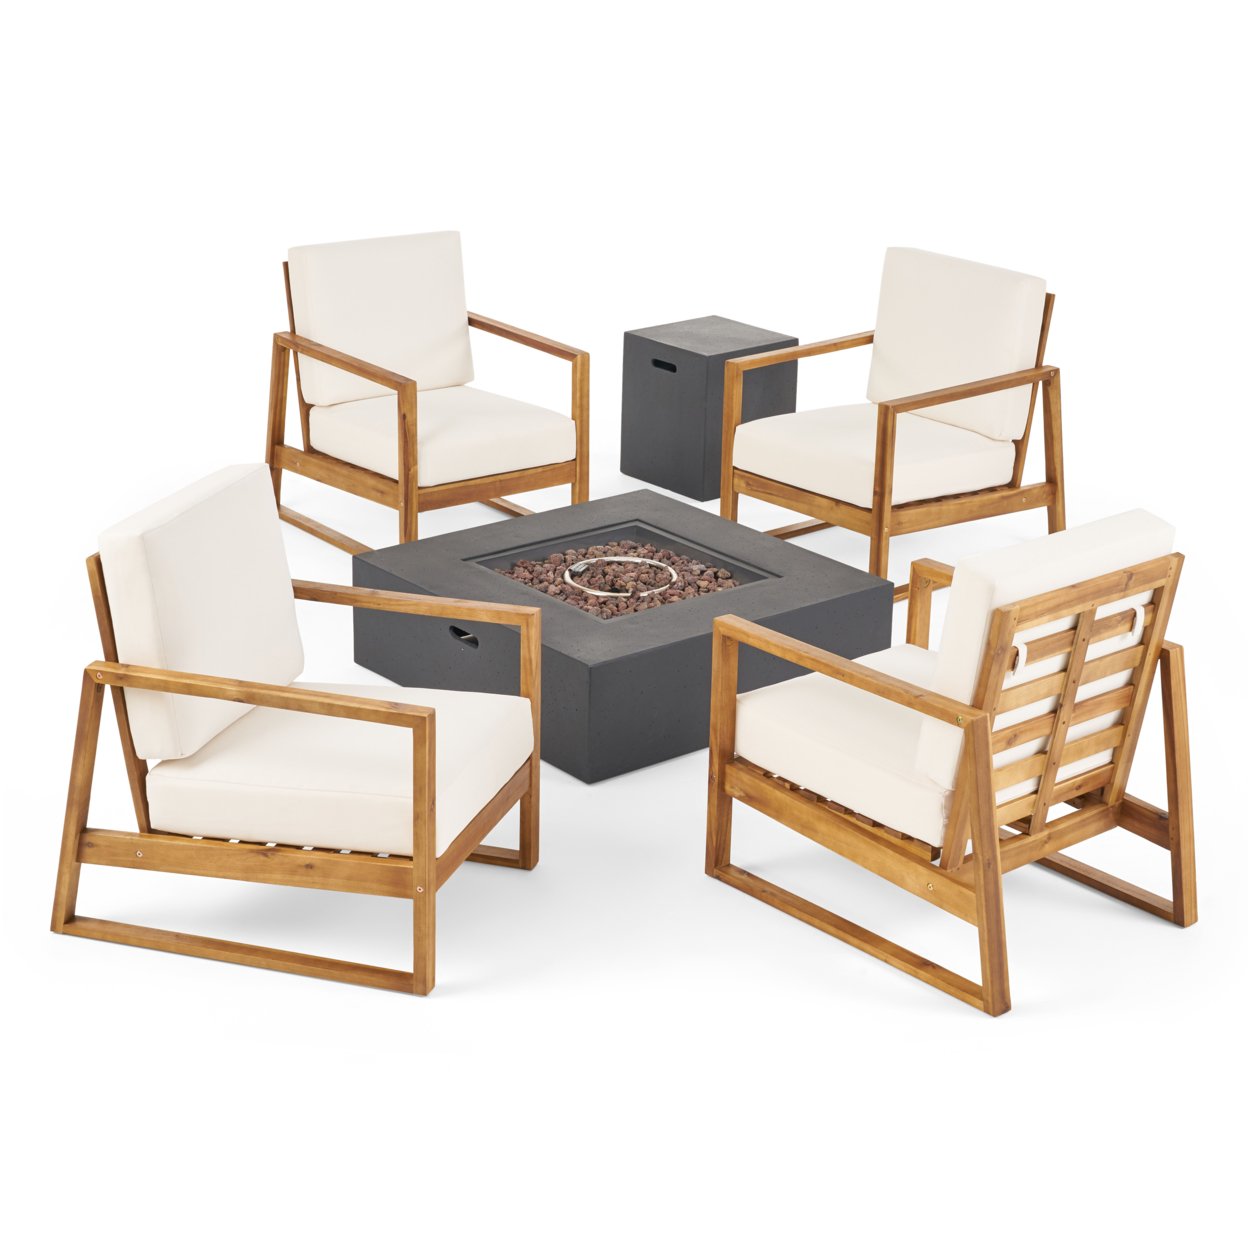 Leila Outdoor 4 Seater Chat Set With Fire Pit - Teak Finish + Beige + Dark Gray